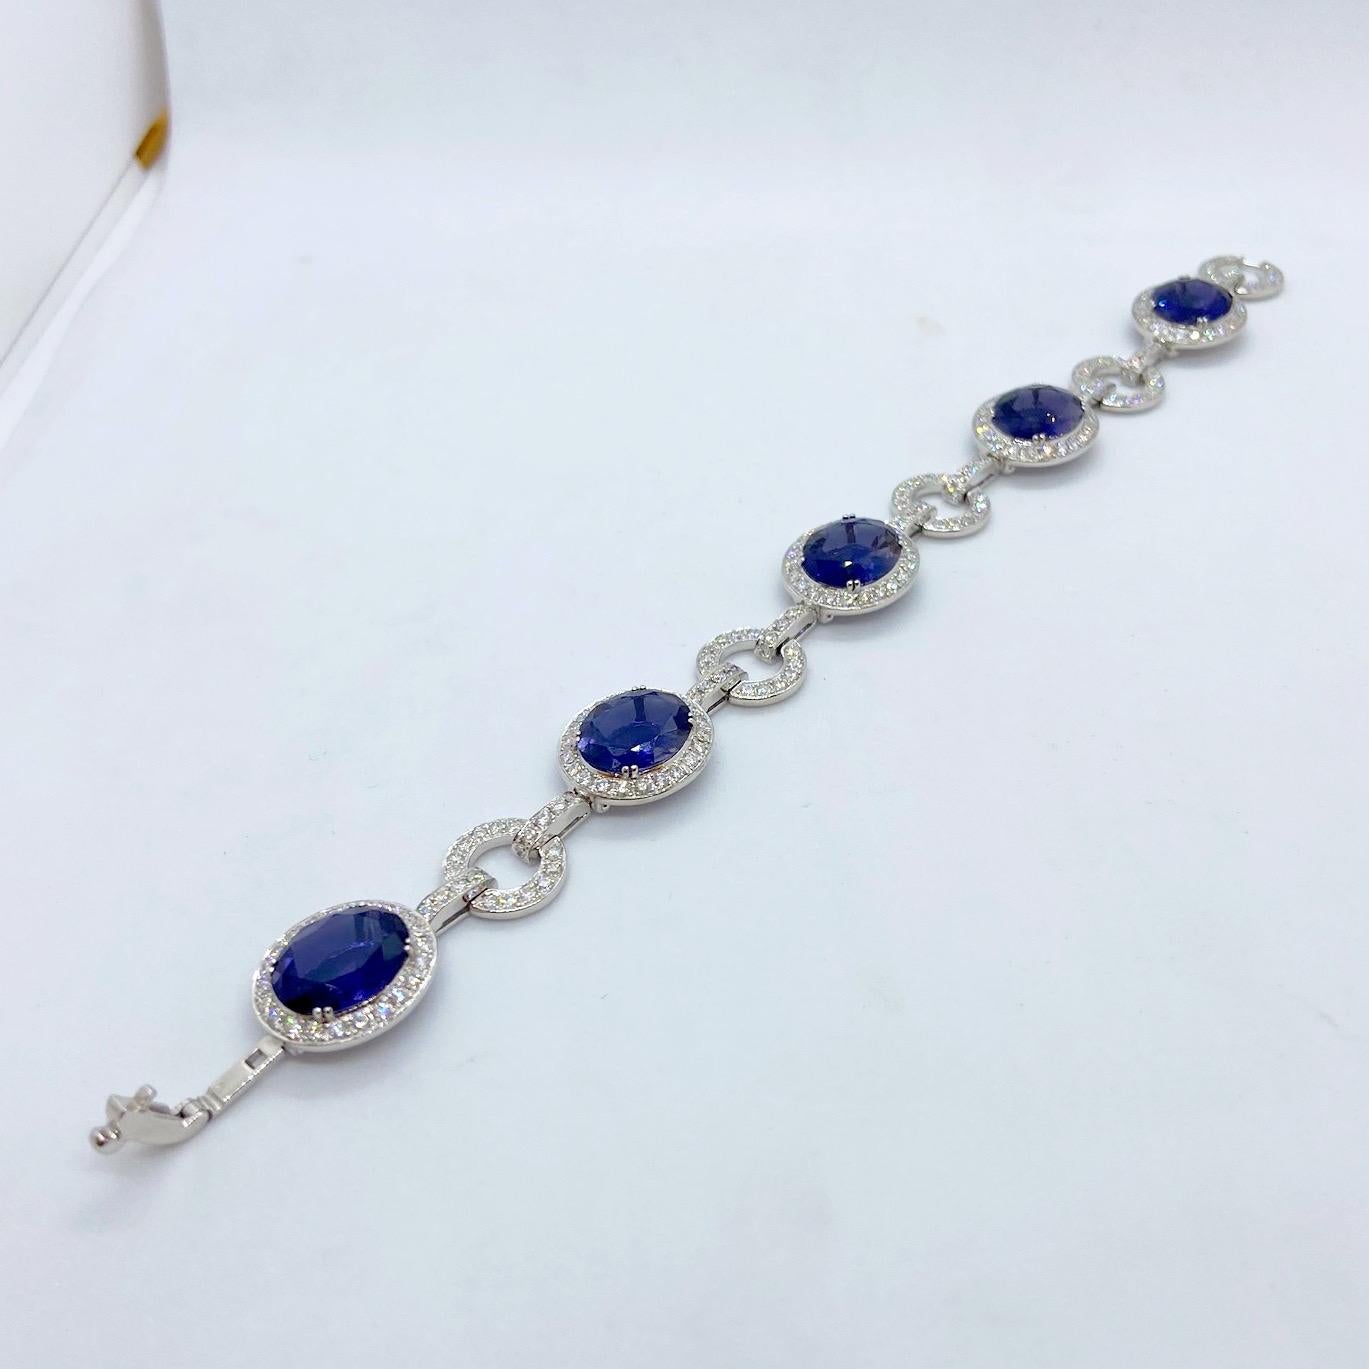 Oval Cut 18 Karat White Gold and Diamond Bracelet with 15.18 Carat Oval Iolite For Sale